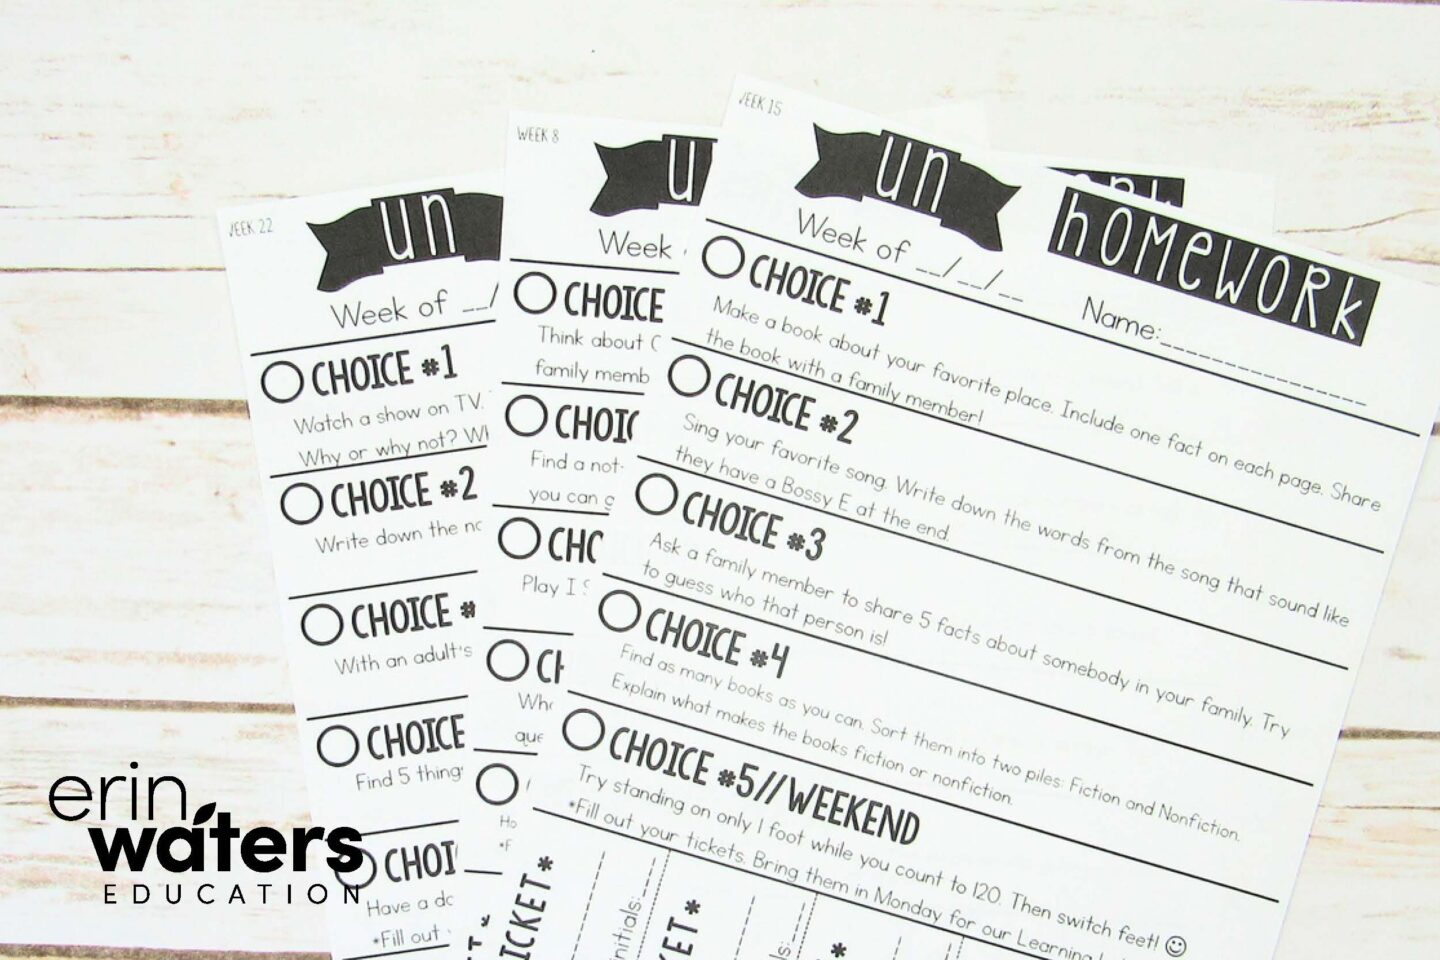 UnHomework in black and white; 5 choices and tear-off raffle tickets on the bottom of the sheet.